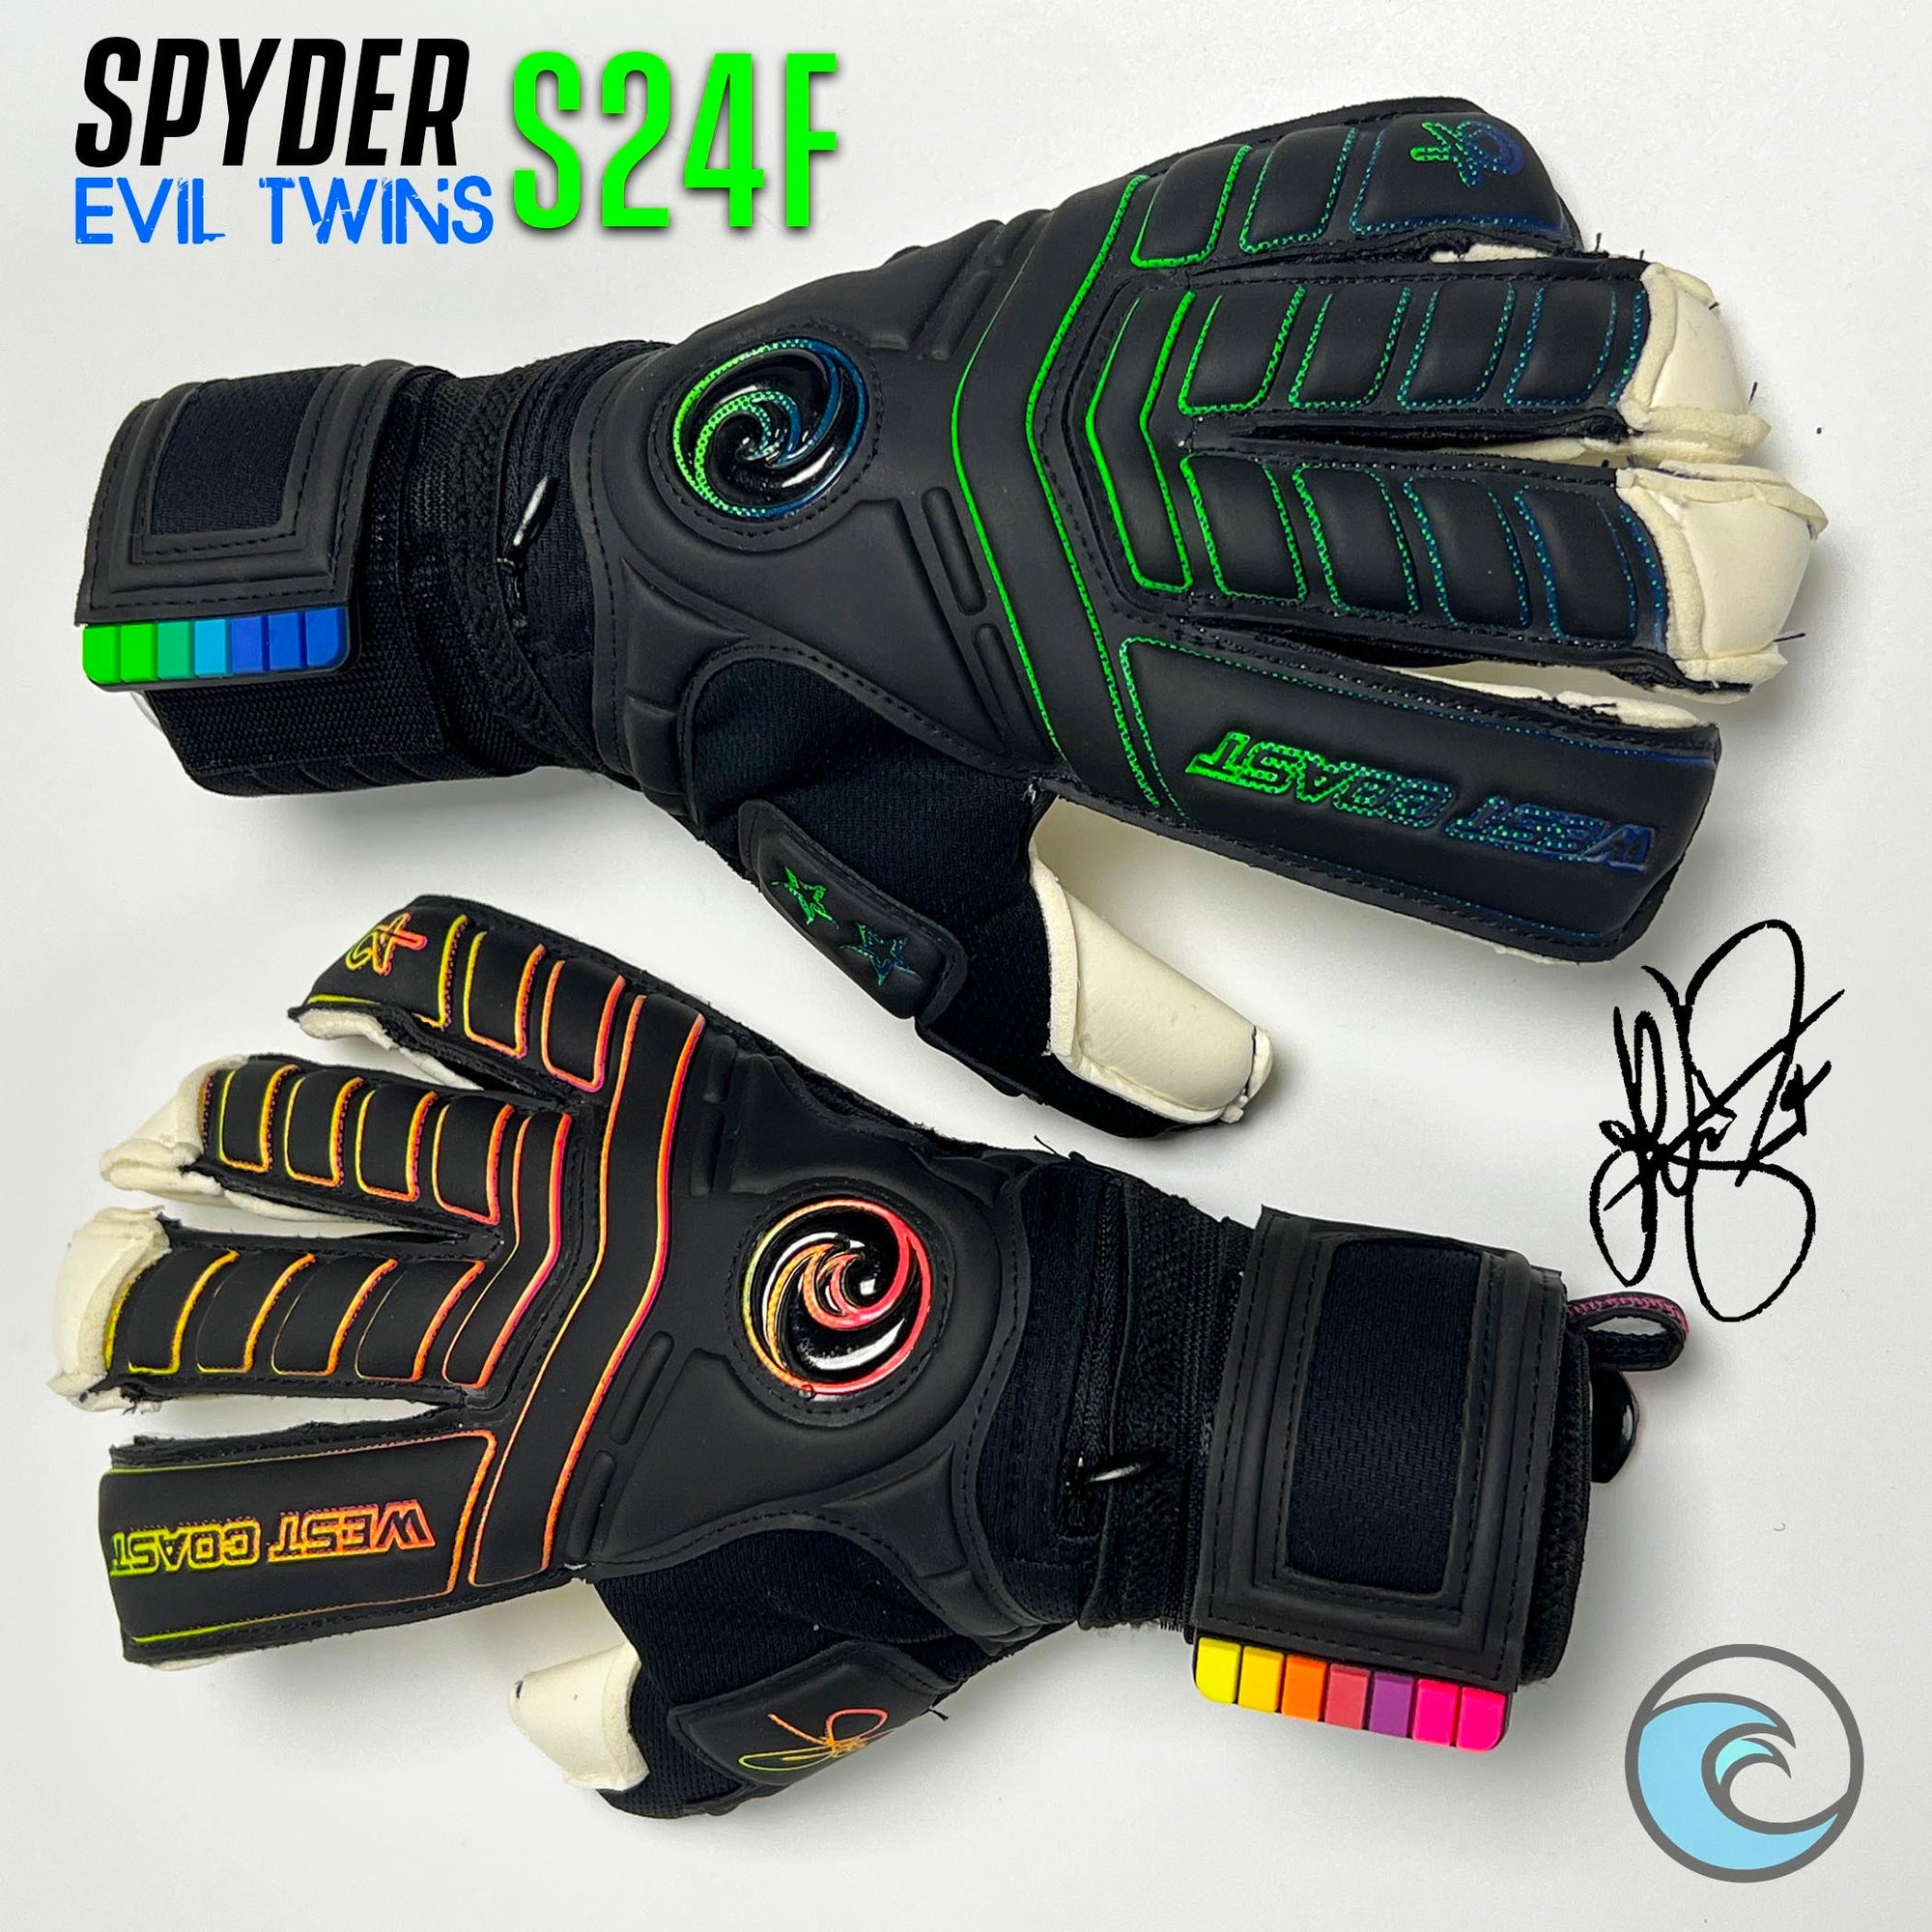 The Spyder S24F Evil Twins are HERE!